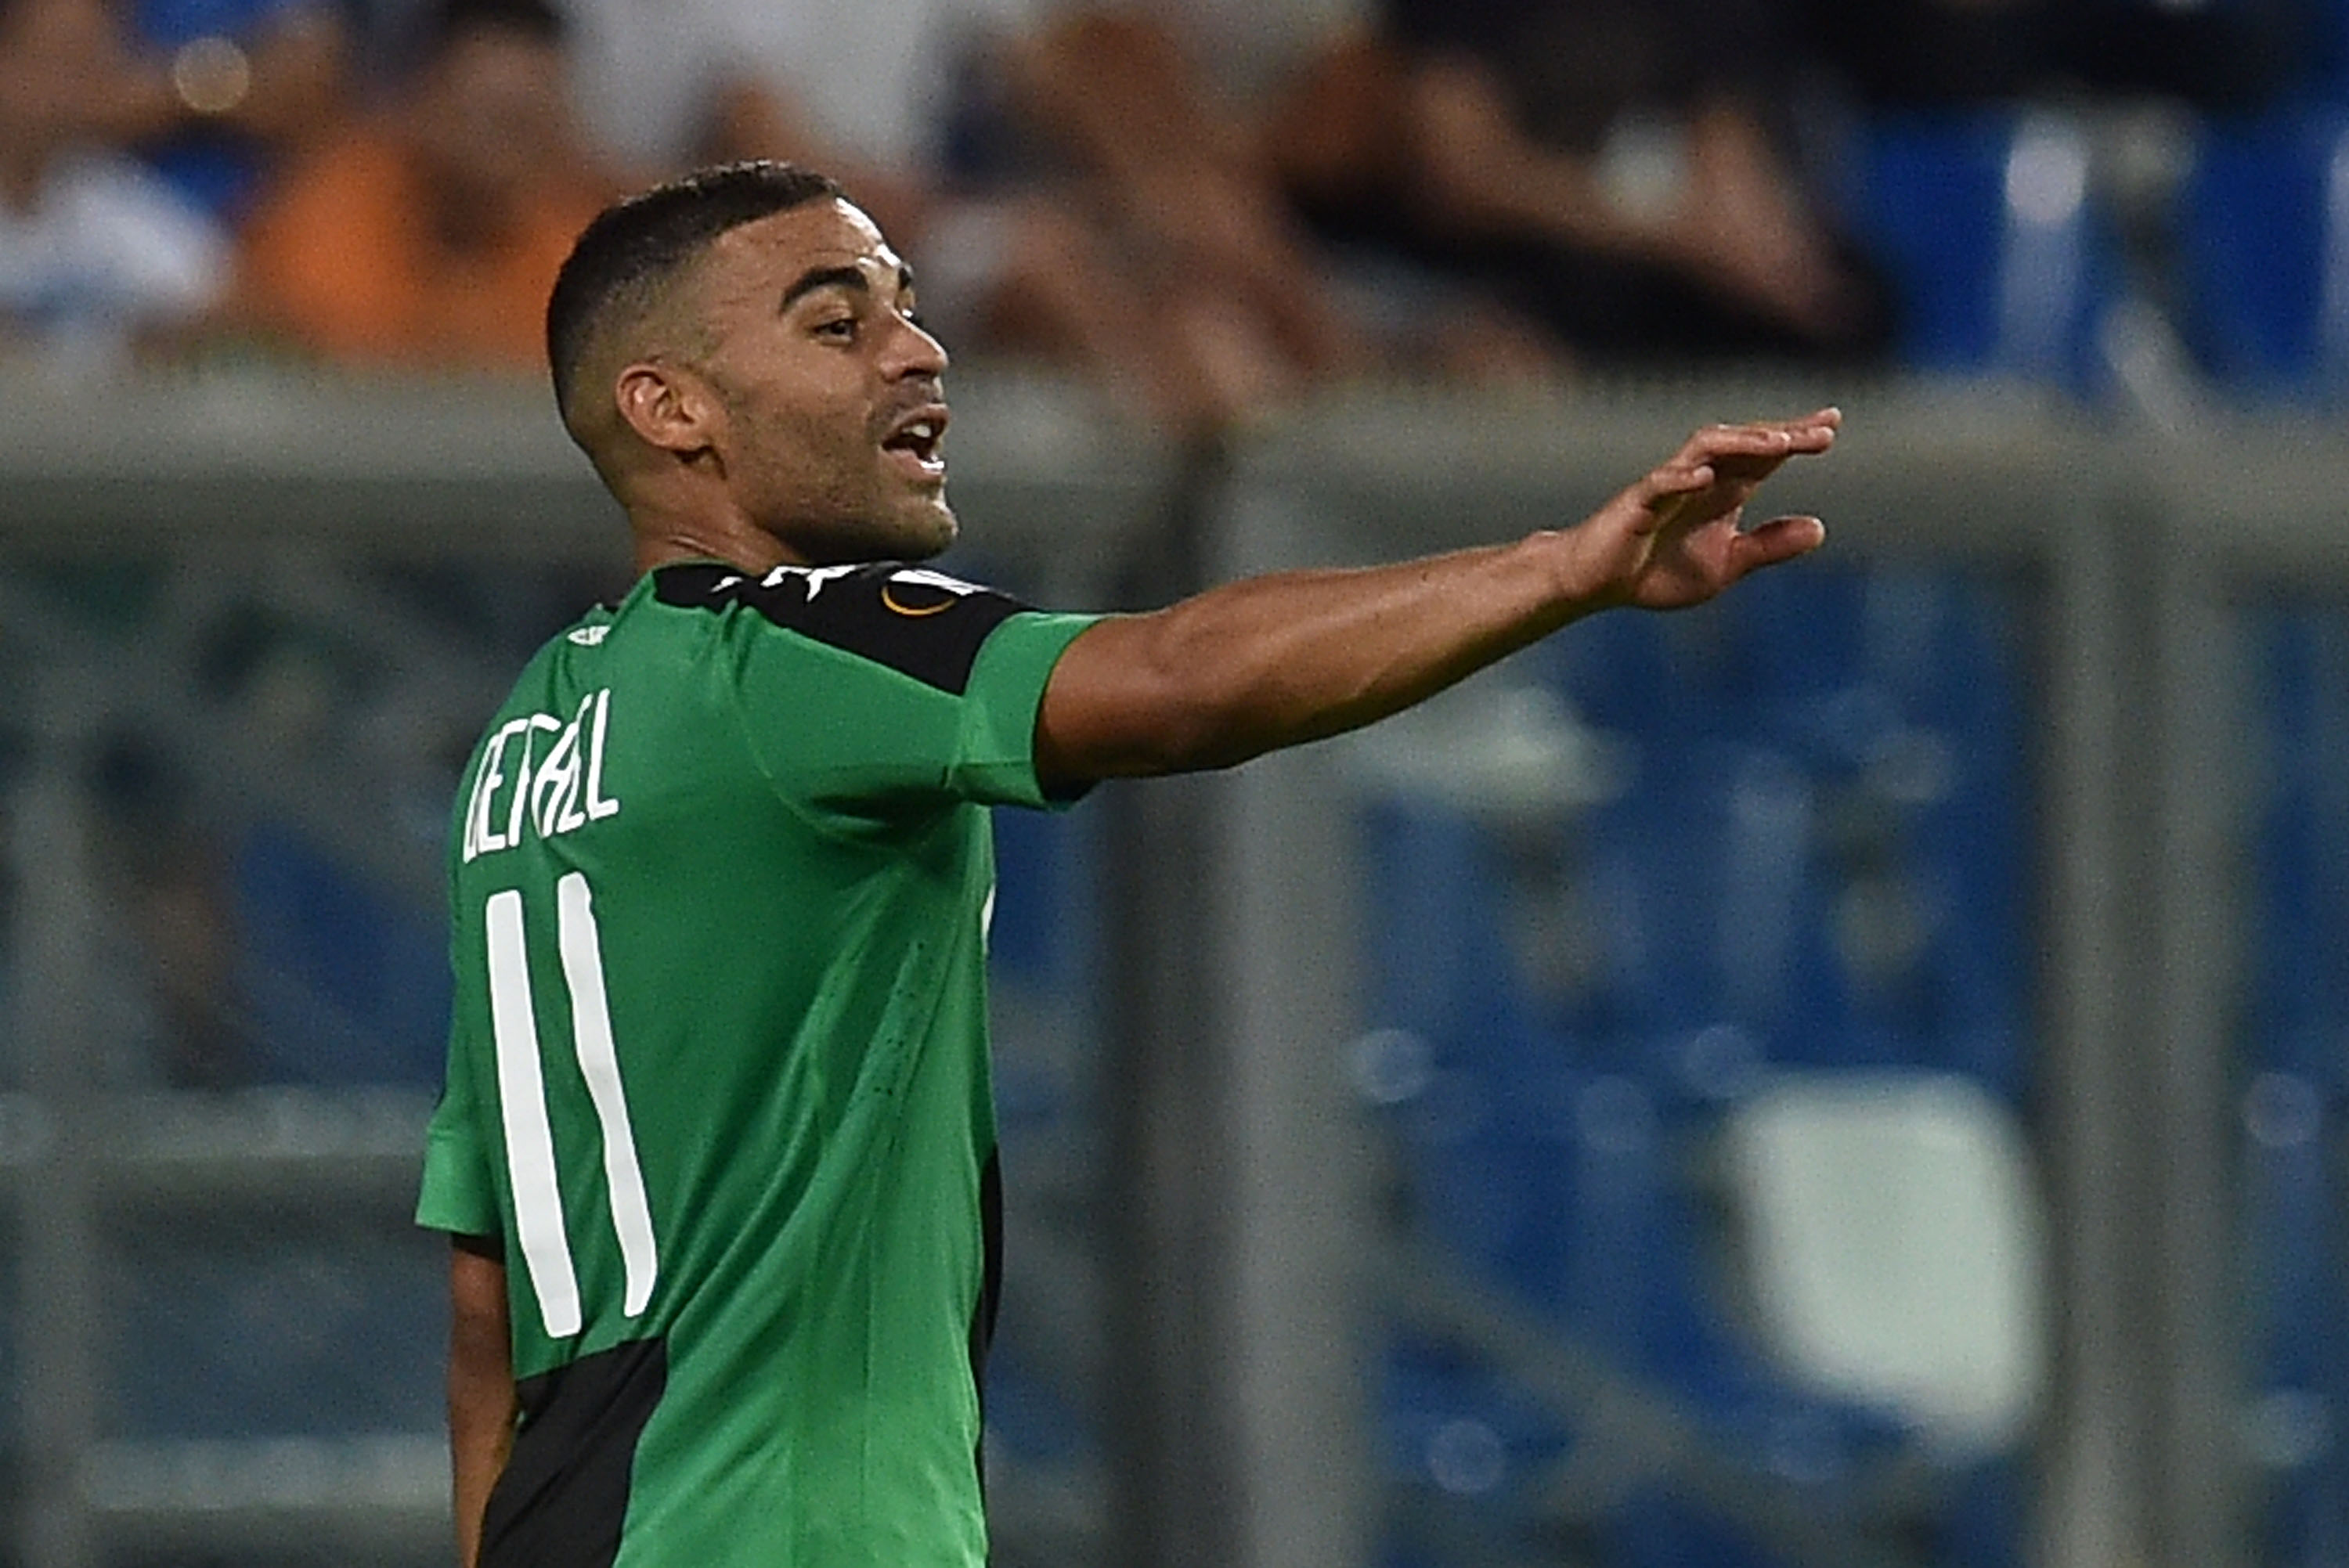 REGGIO NELL'EMILIA, ITALY - SEPTEMBER 15:  Gregoire Defrel of US Sassuolo Calcio celebrates after scoring the goal 2-0 during the UEFA Europa League match between US Sassuolo Calcio and Athletic Club at Mapei Stadium - Citta' del Tricolore on September 15, 2016 in Reggio nell'Emilia, Italy.  (Photo by Giuseppe Bellini/Getty Images)